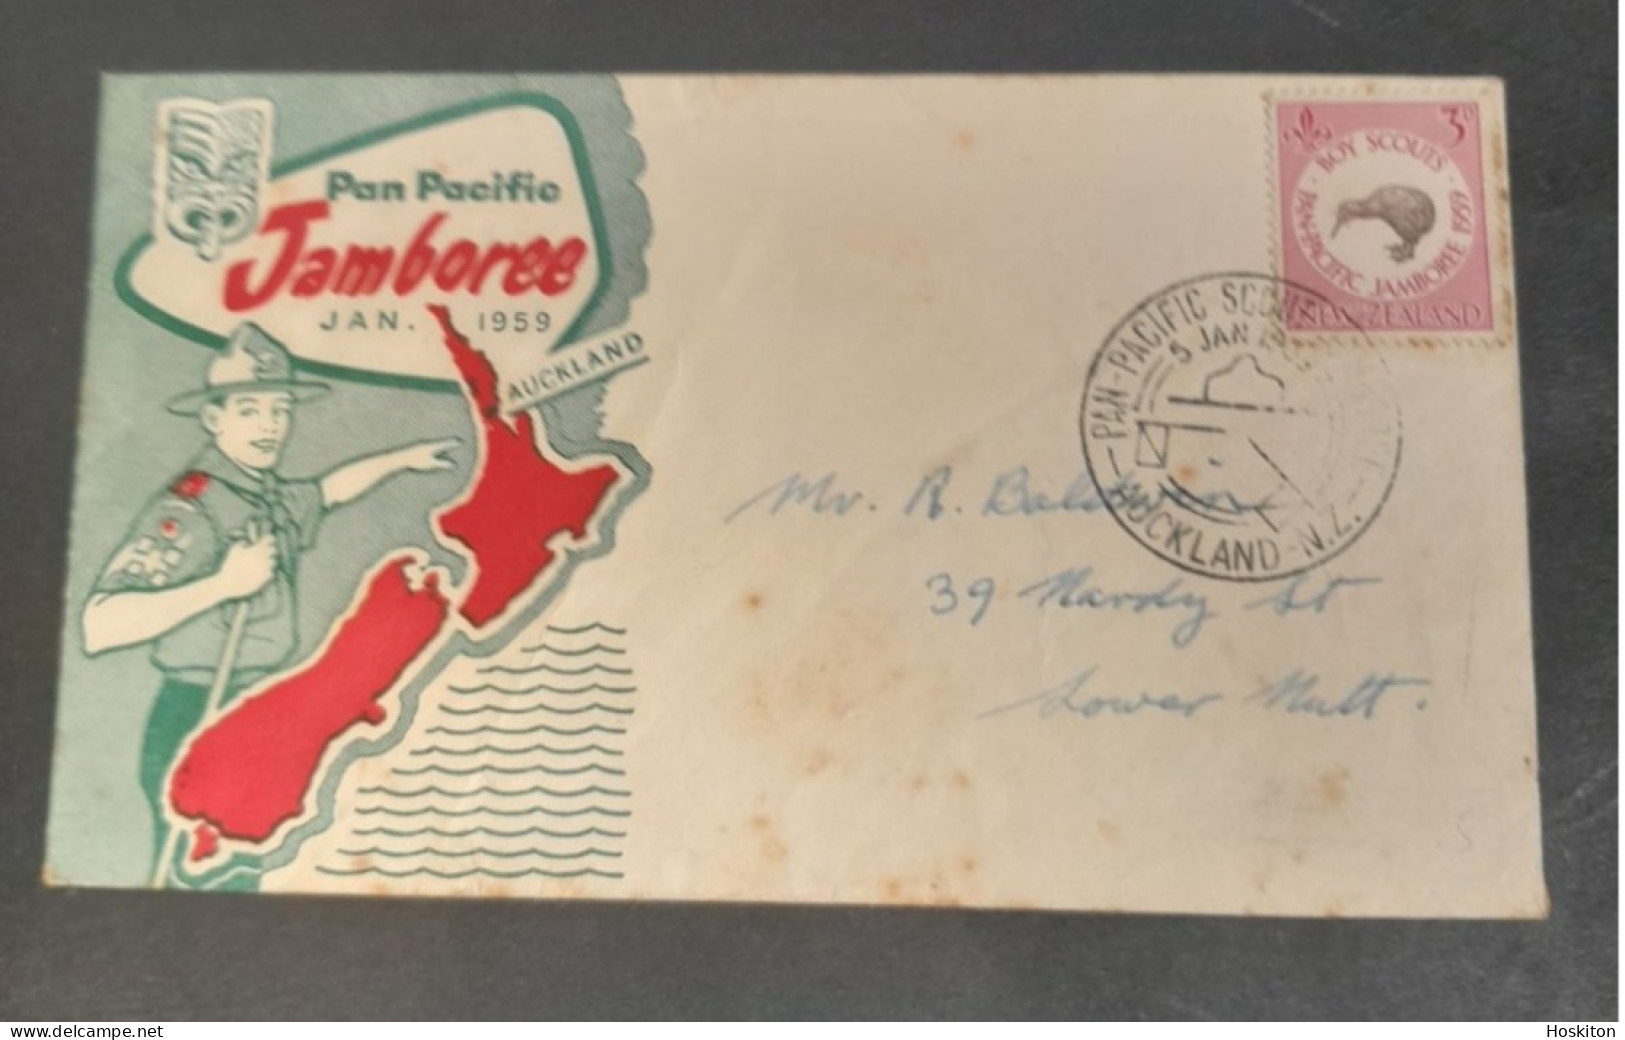 Pan Pacific Jamboree 1959 Auckland NZ - Covers & Documents